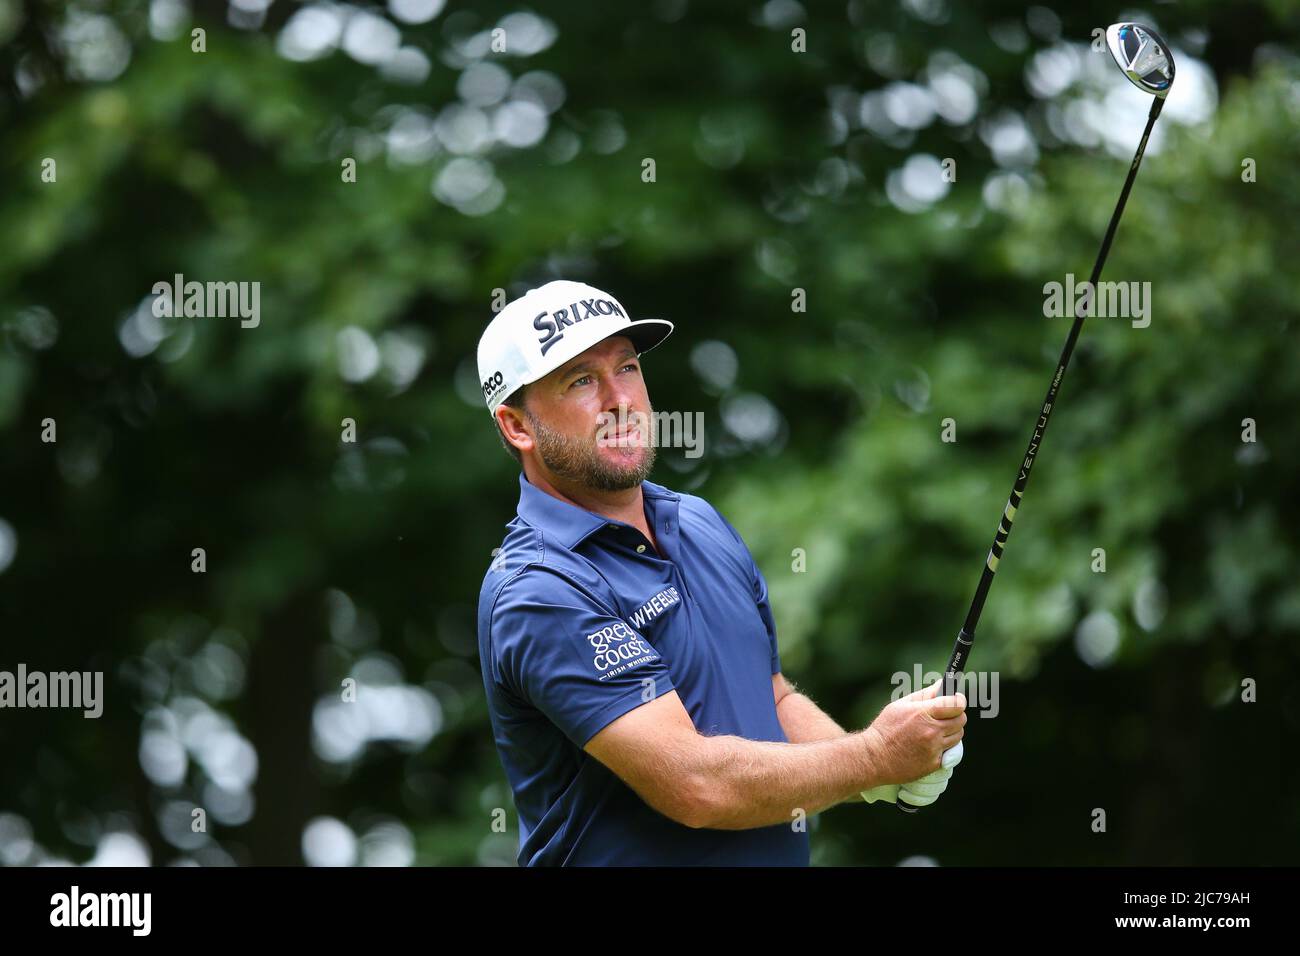 ST ALBANS, ENGLAND - JUNE 09: Graeme McDowell of Northern Ireland tees off on the 4th hole during day one of the LIV Golf Invitational at The Centurion Club on June 9, 2022 in St Albans, England. (MB Media) Stock Photo